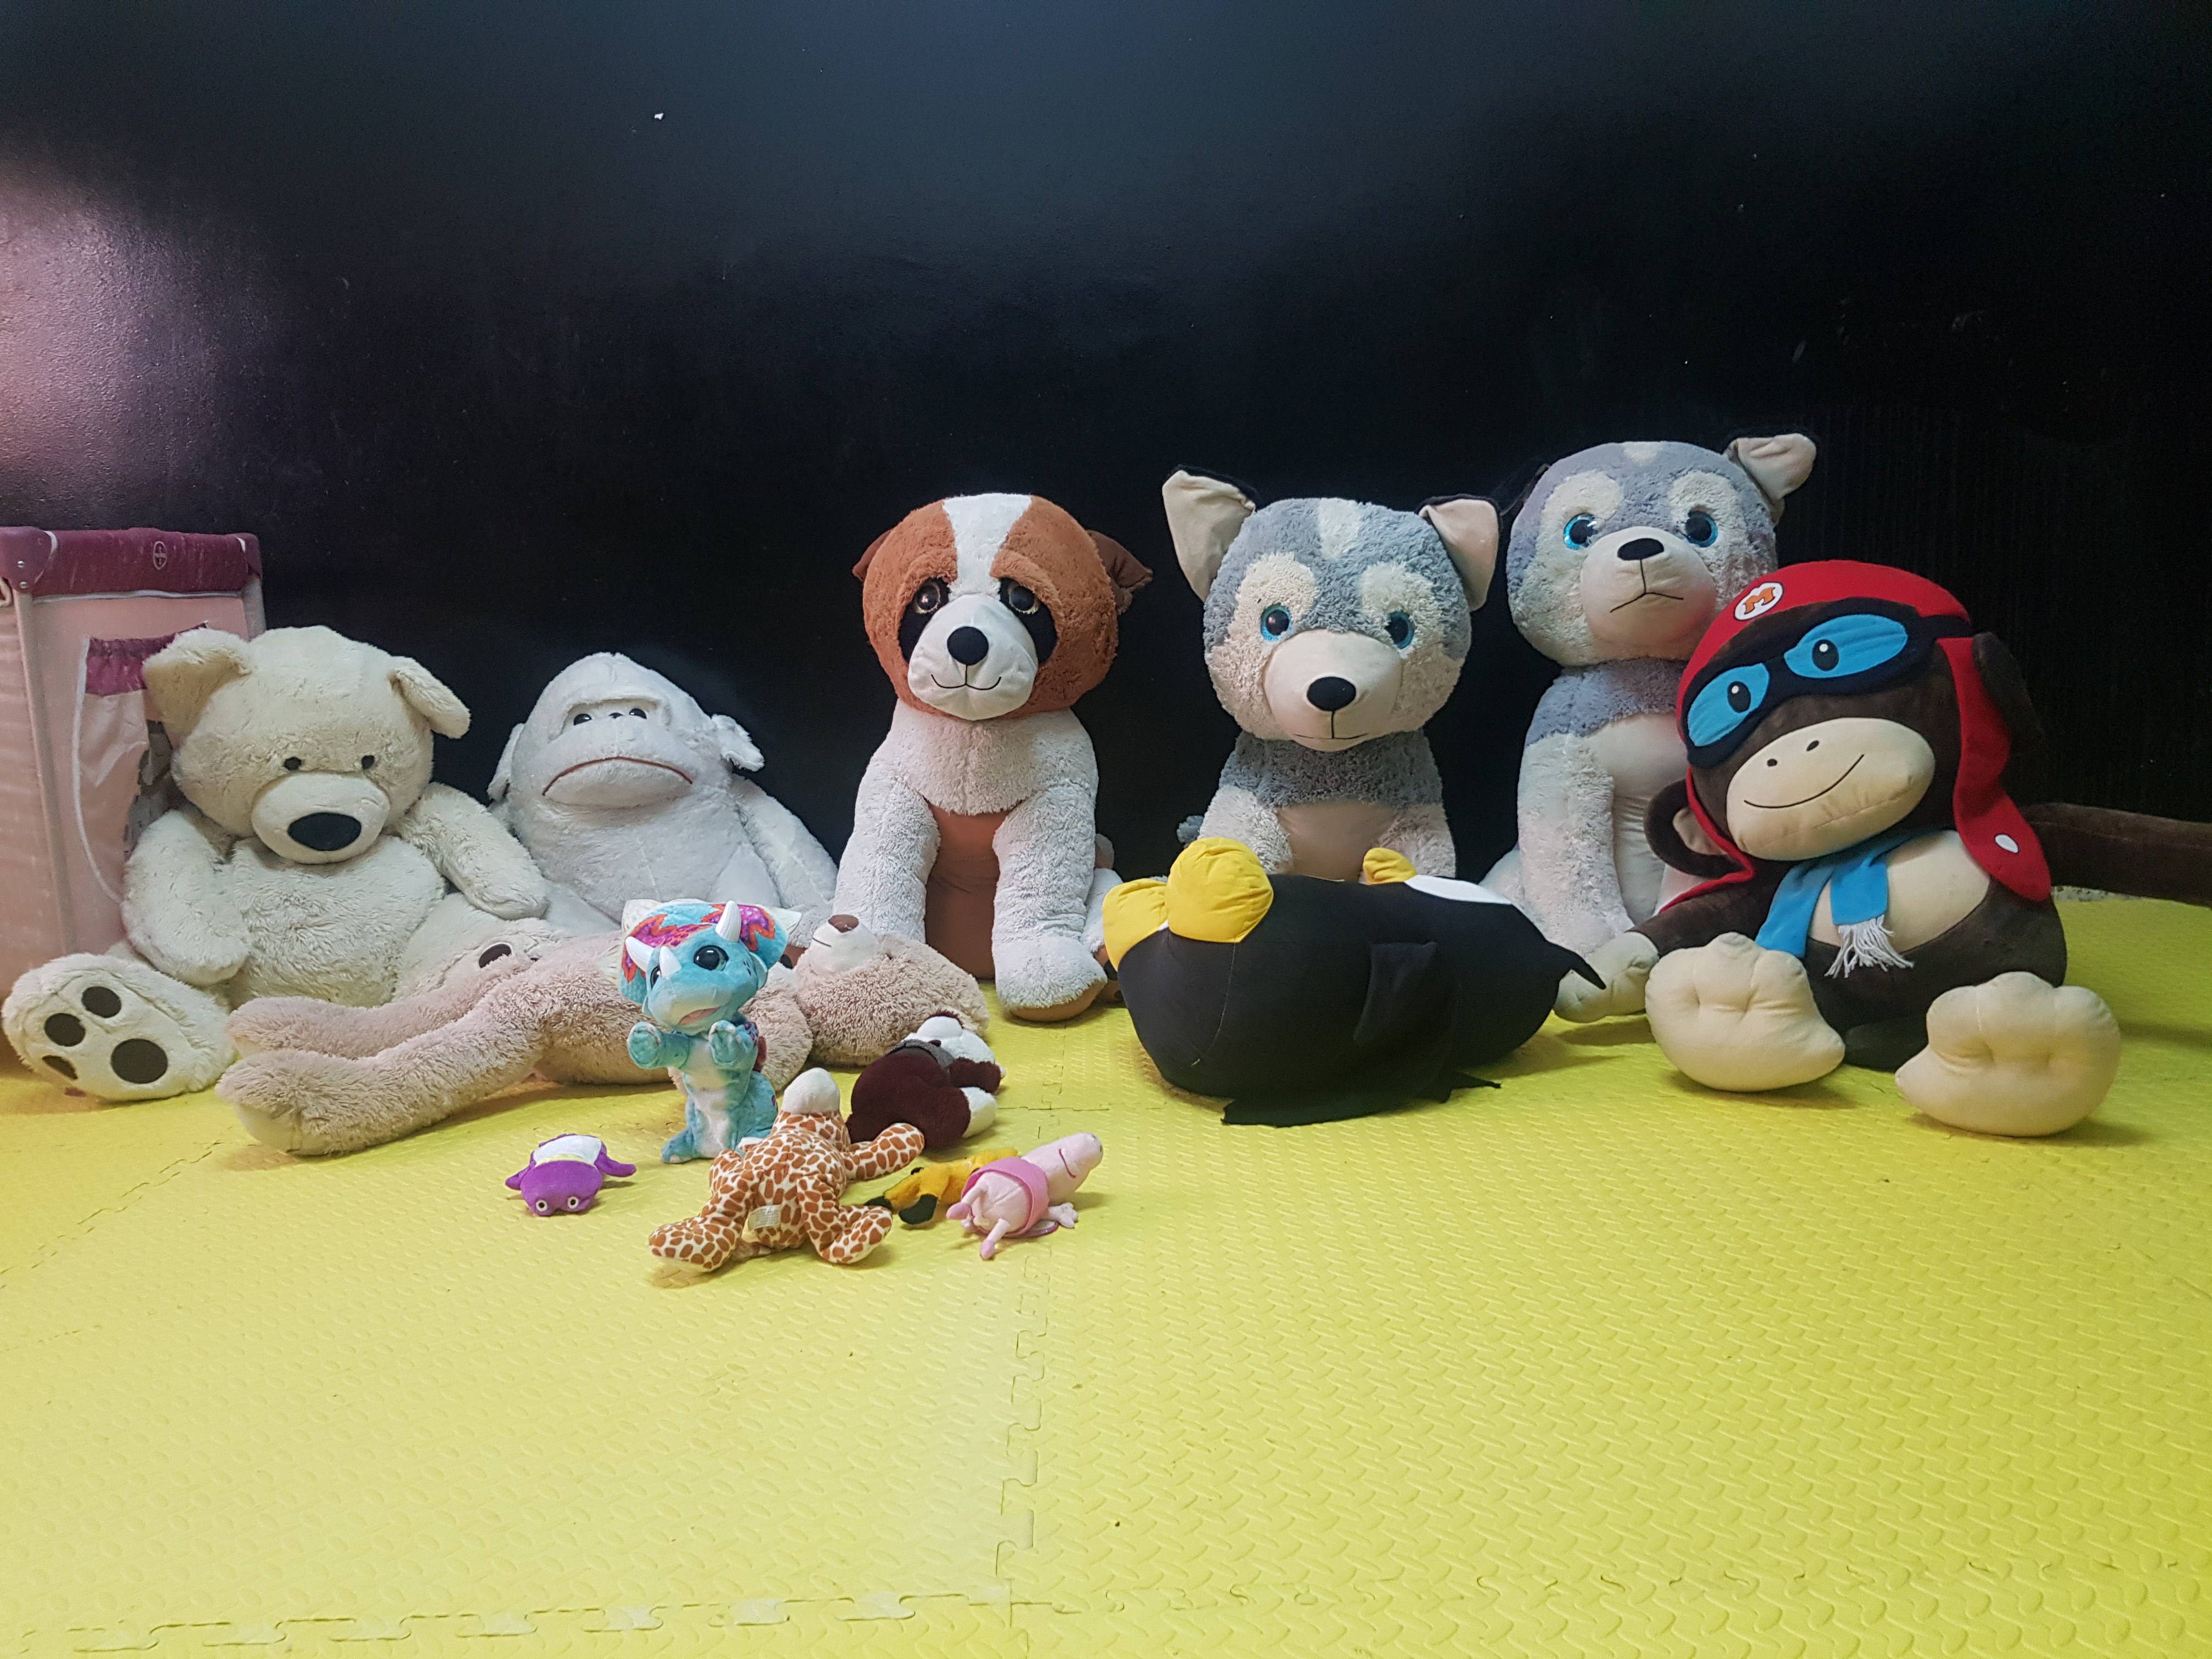 Wholesale of dolls stuffed animals, bears and cartoon characters